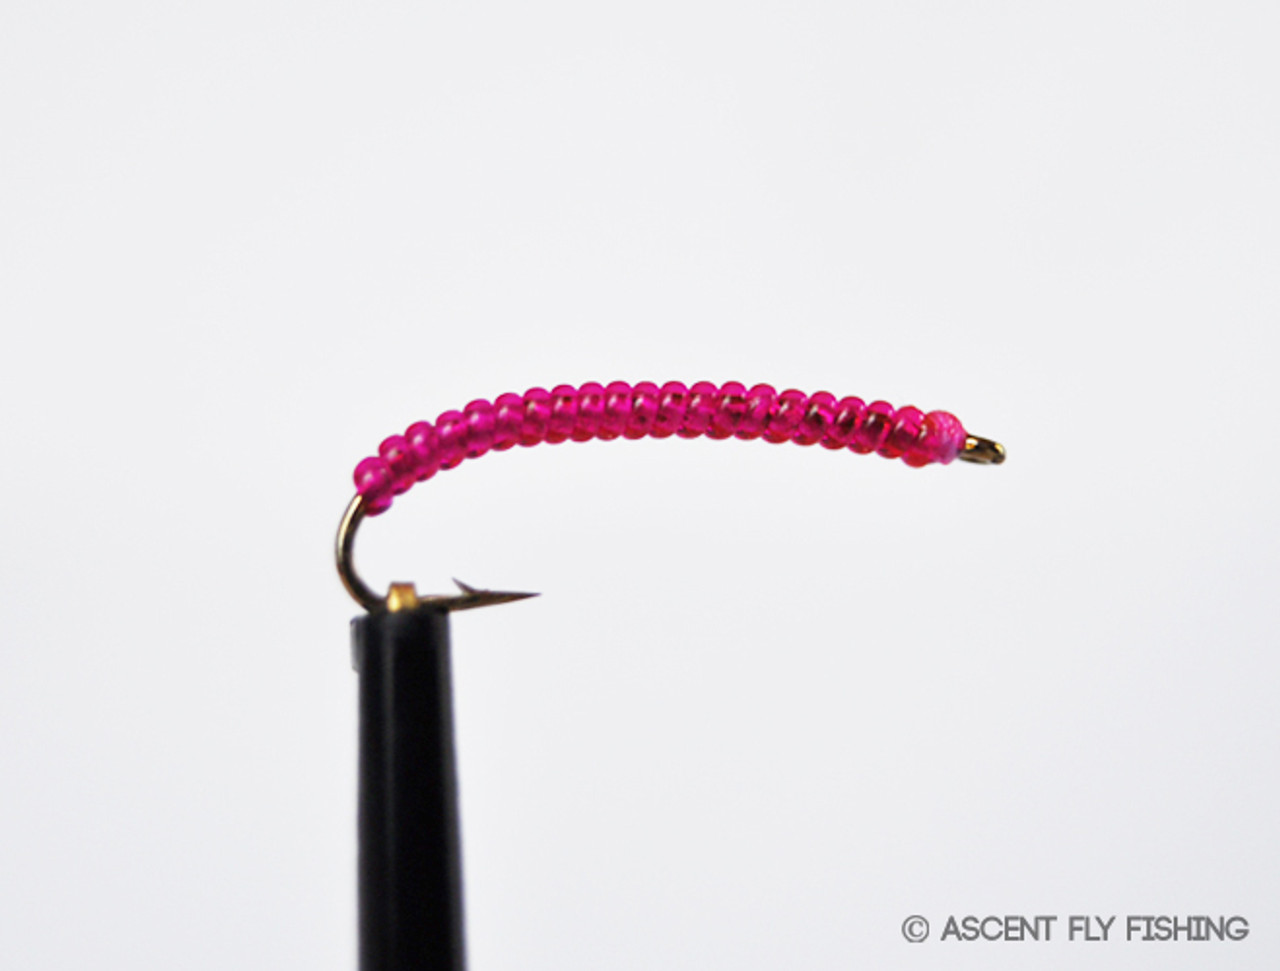 Rock Worm - Ascent Fly Fishing